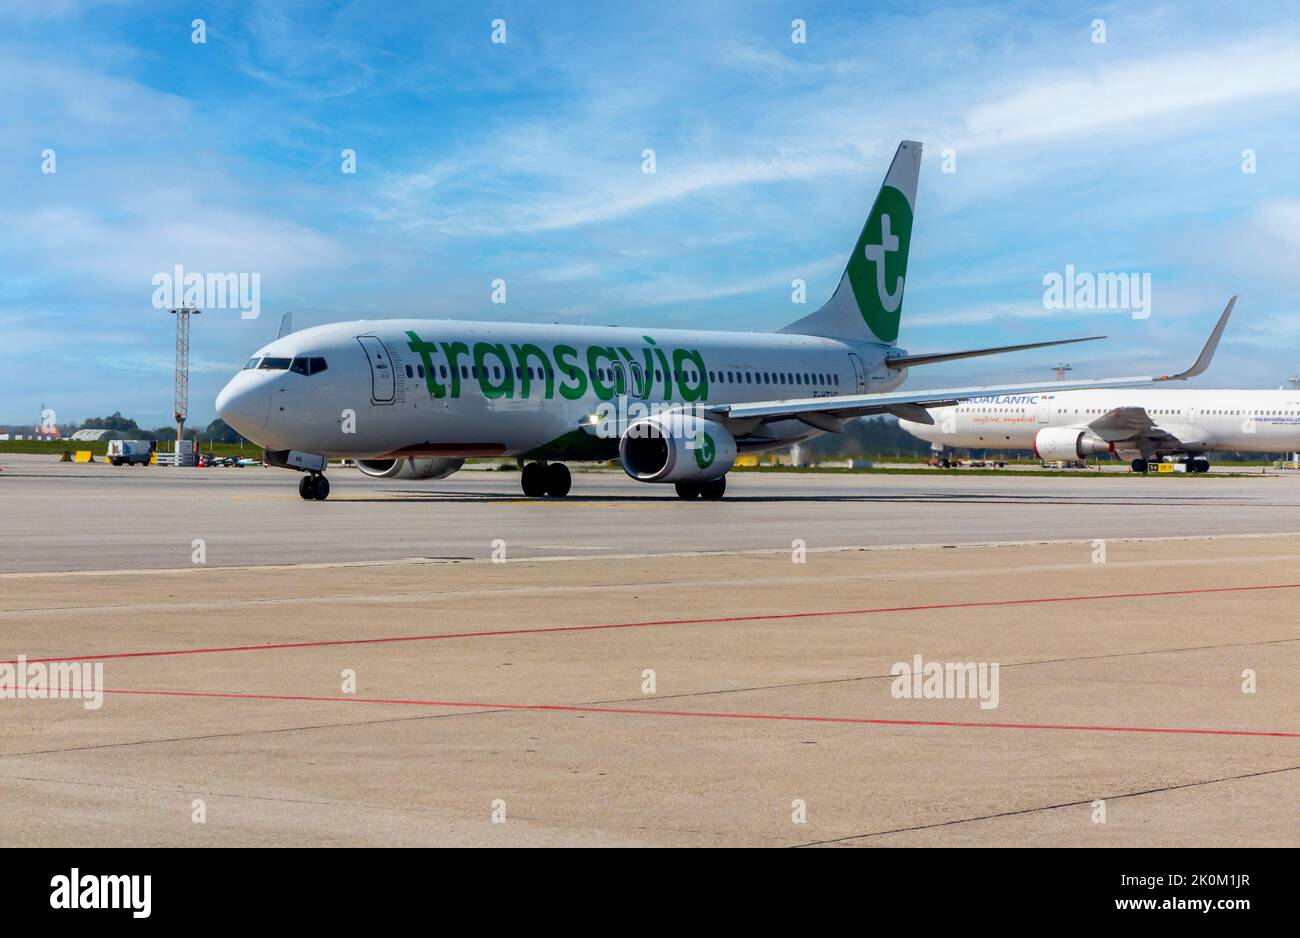 Transavia Boeing 737-800 aircraft at Porto airport in Portugal. Stock Photo